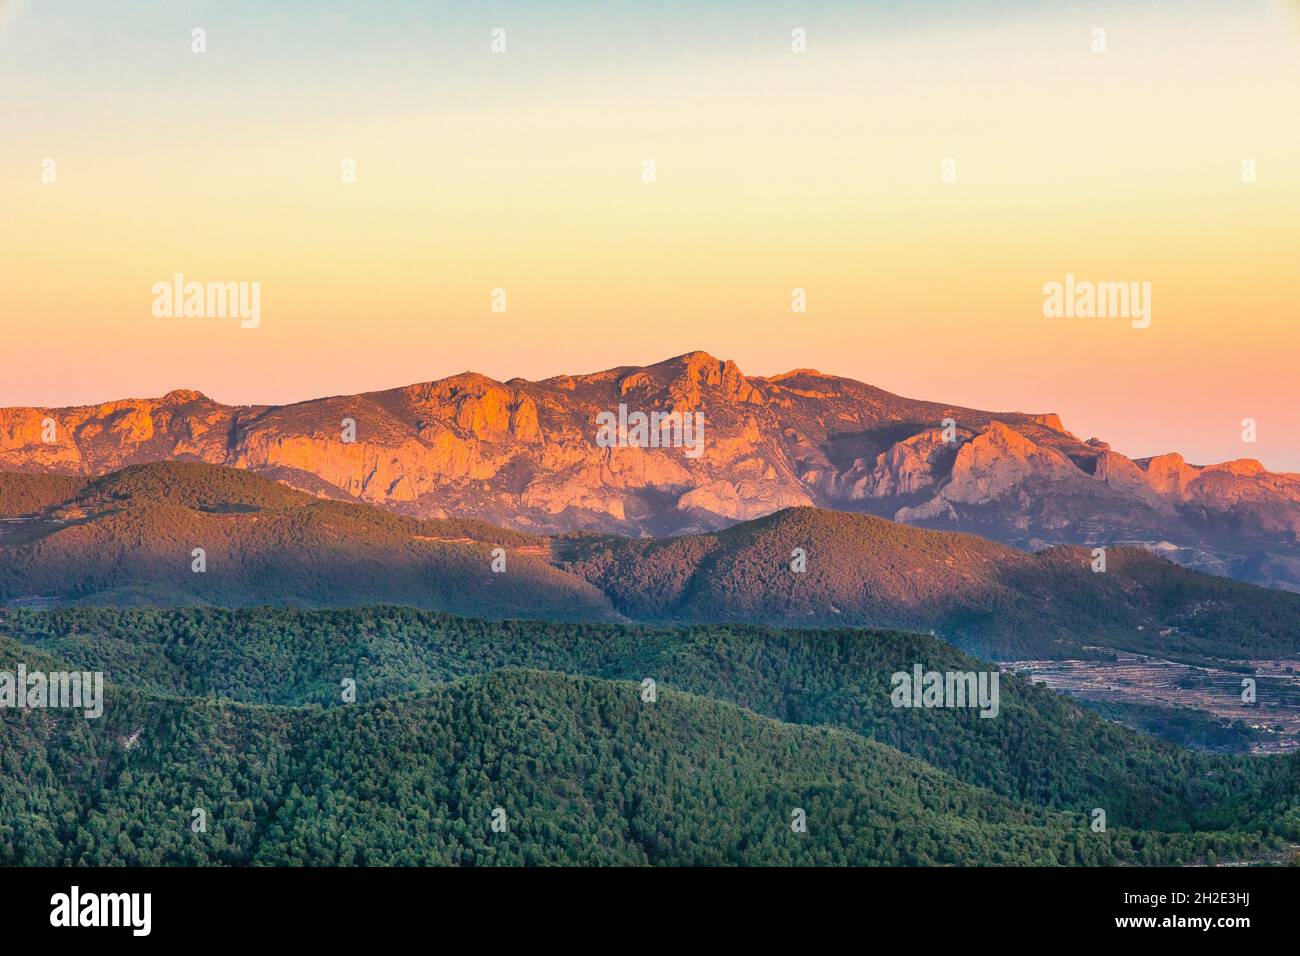 Morning over the wooded slopes of the Cabeco D'or mountains .Spain.Horizontal view. Stock Photo